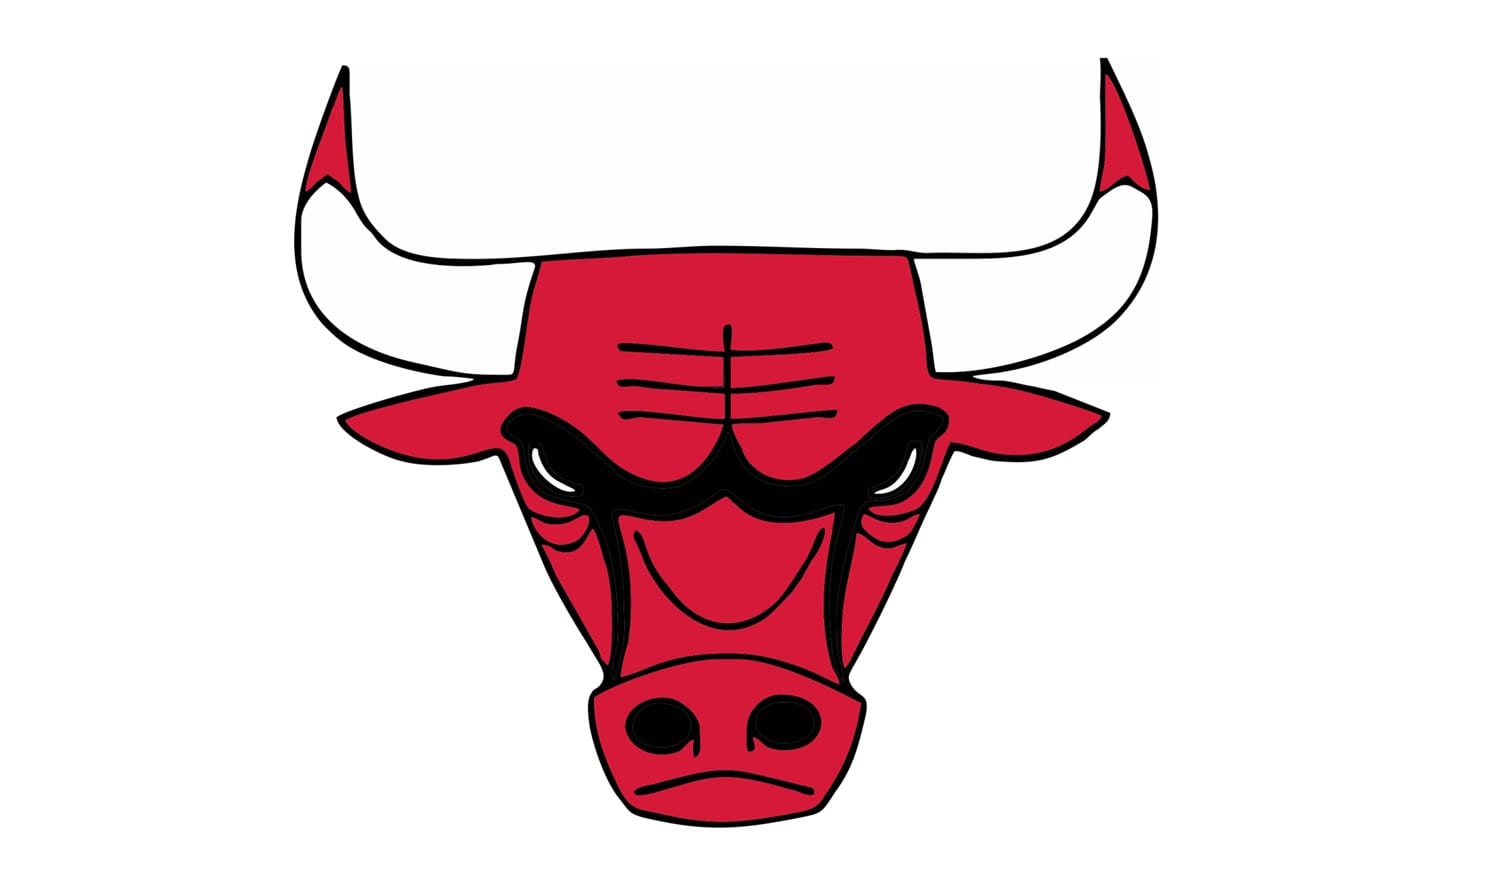 How To Draw The Chicago Bulls Logo (nba)